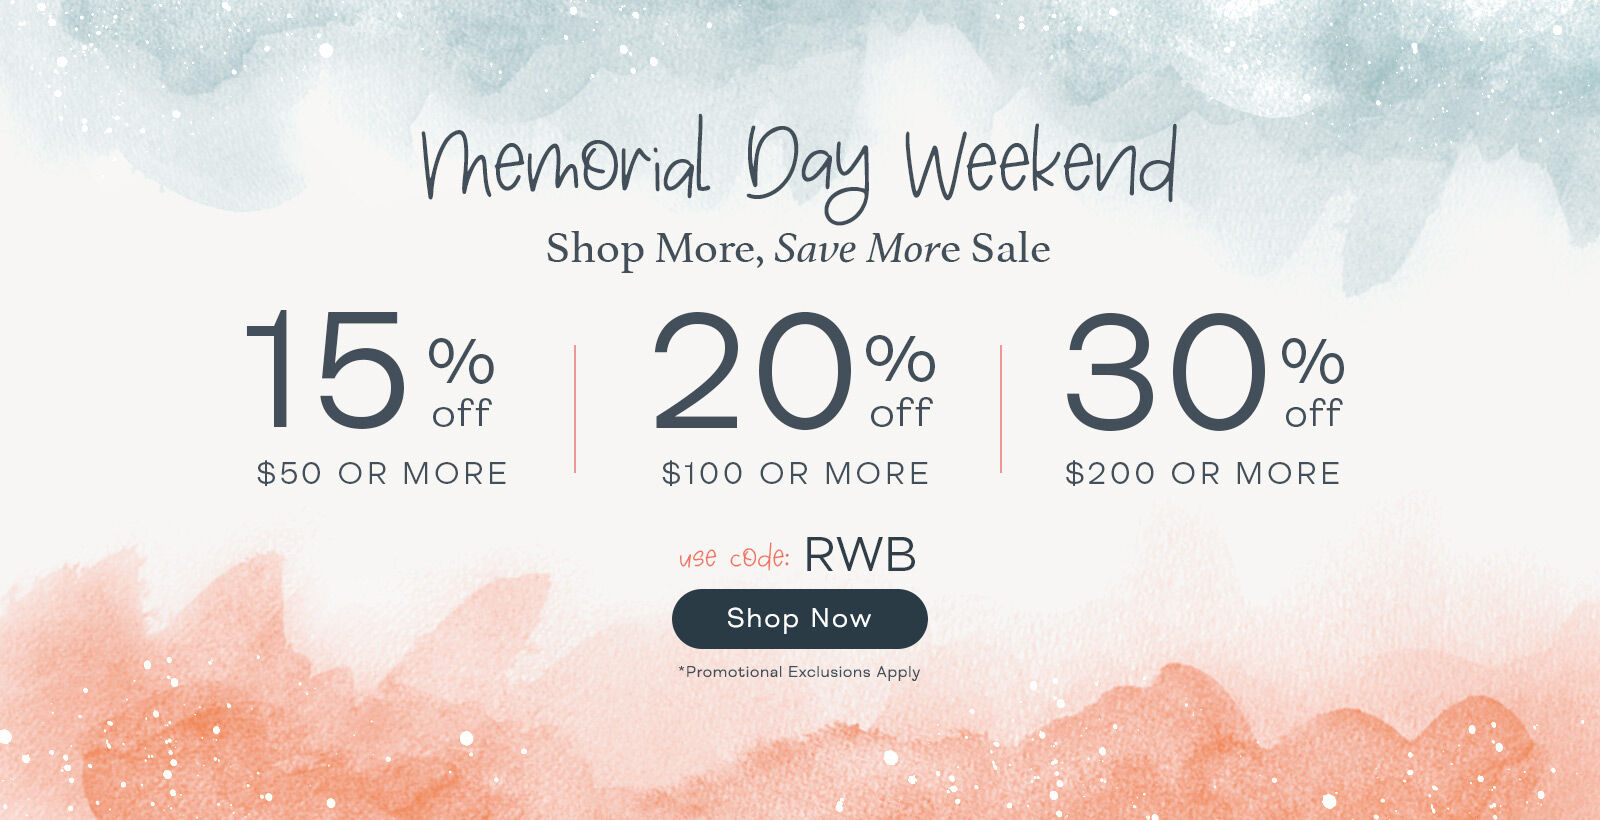 Buy More Save More with code RWB *Excludes Great Deals